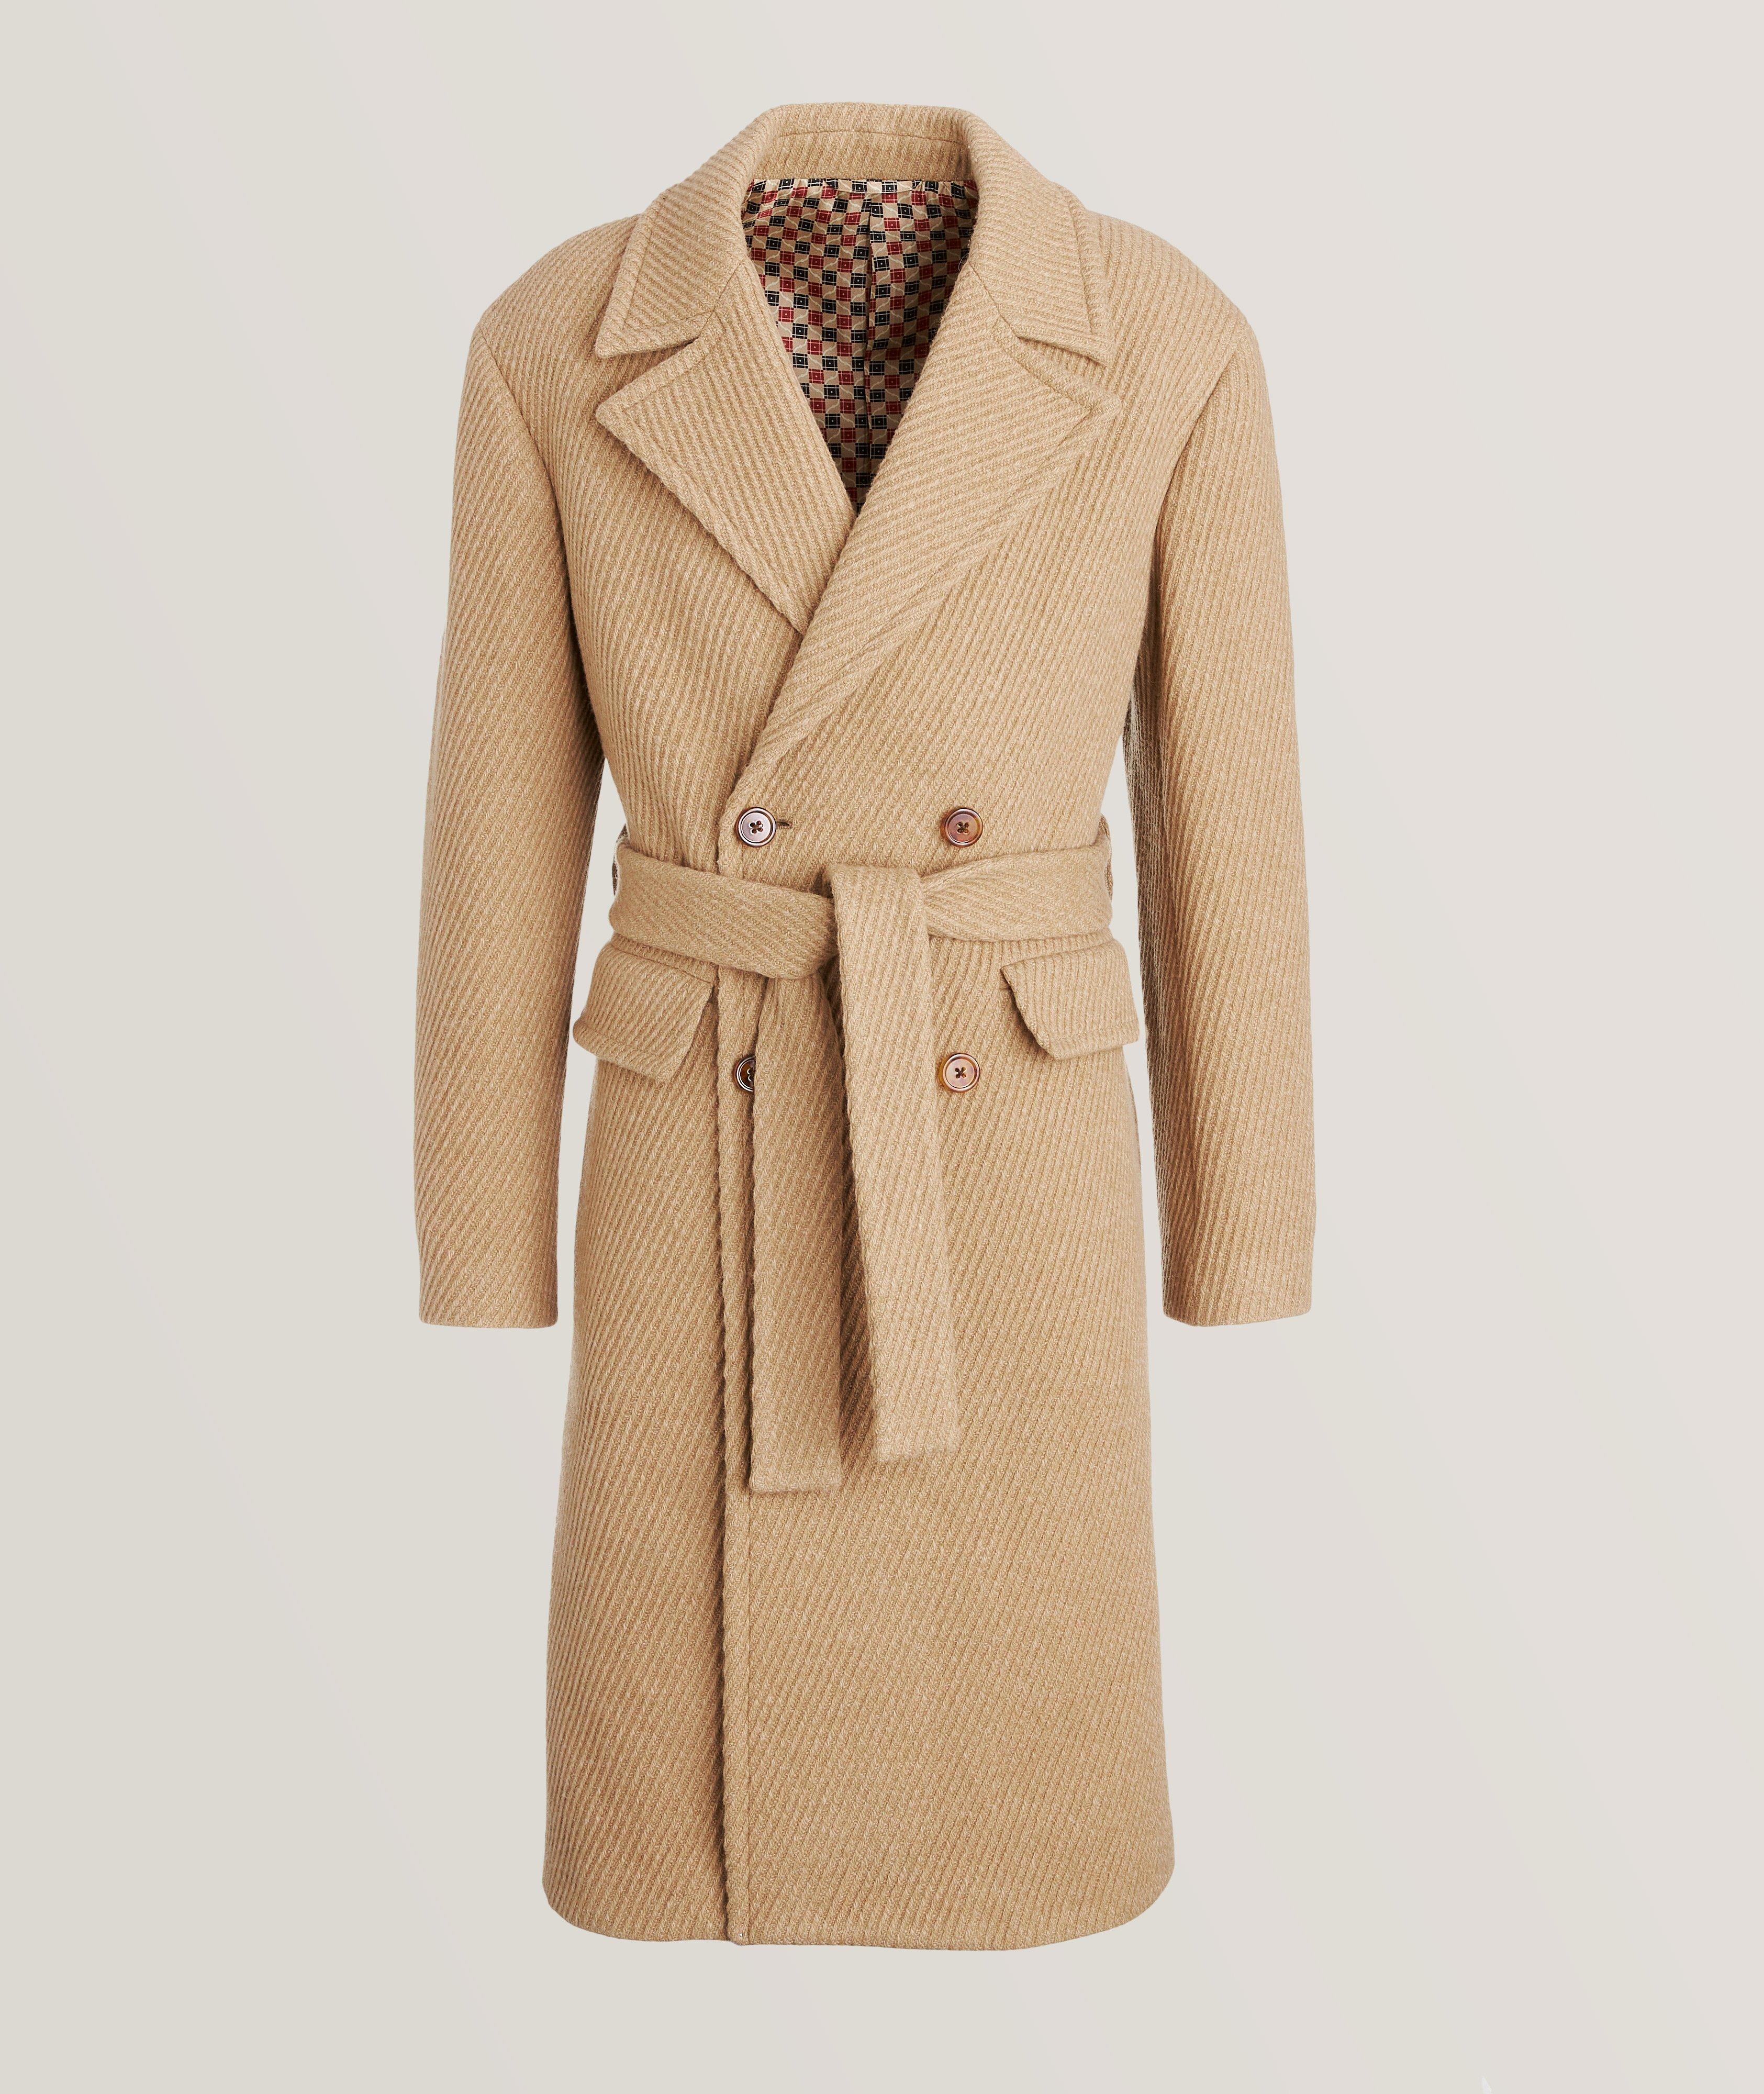 Etro Textured Wool-Blend Twill Belted Overcoat